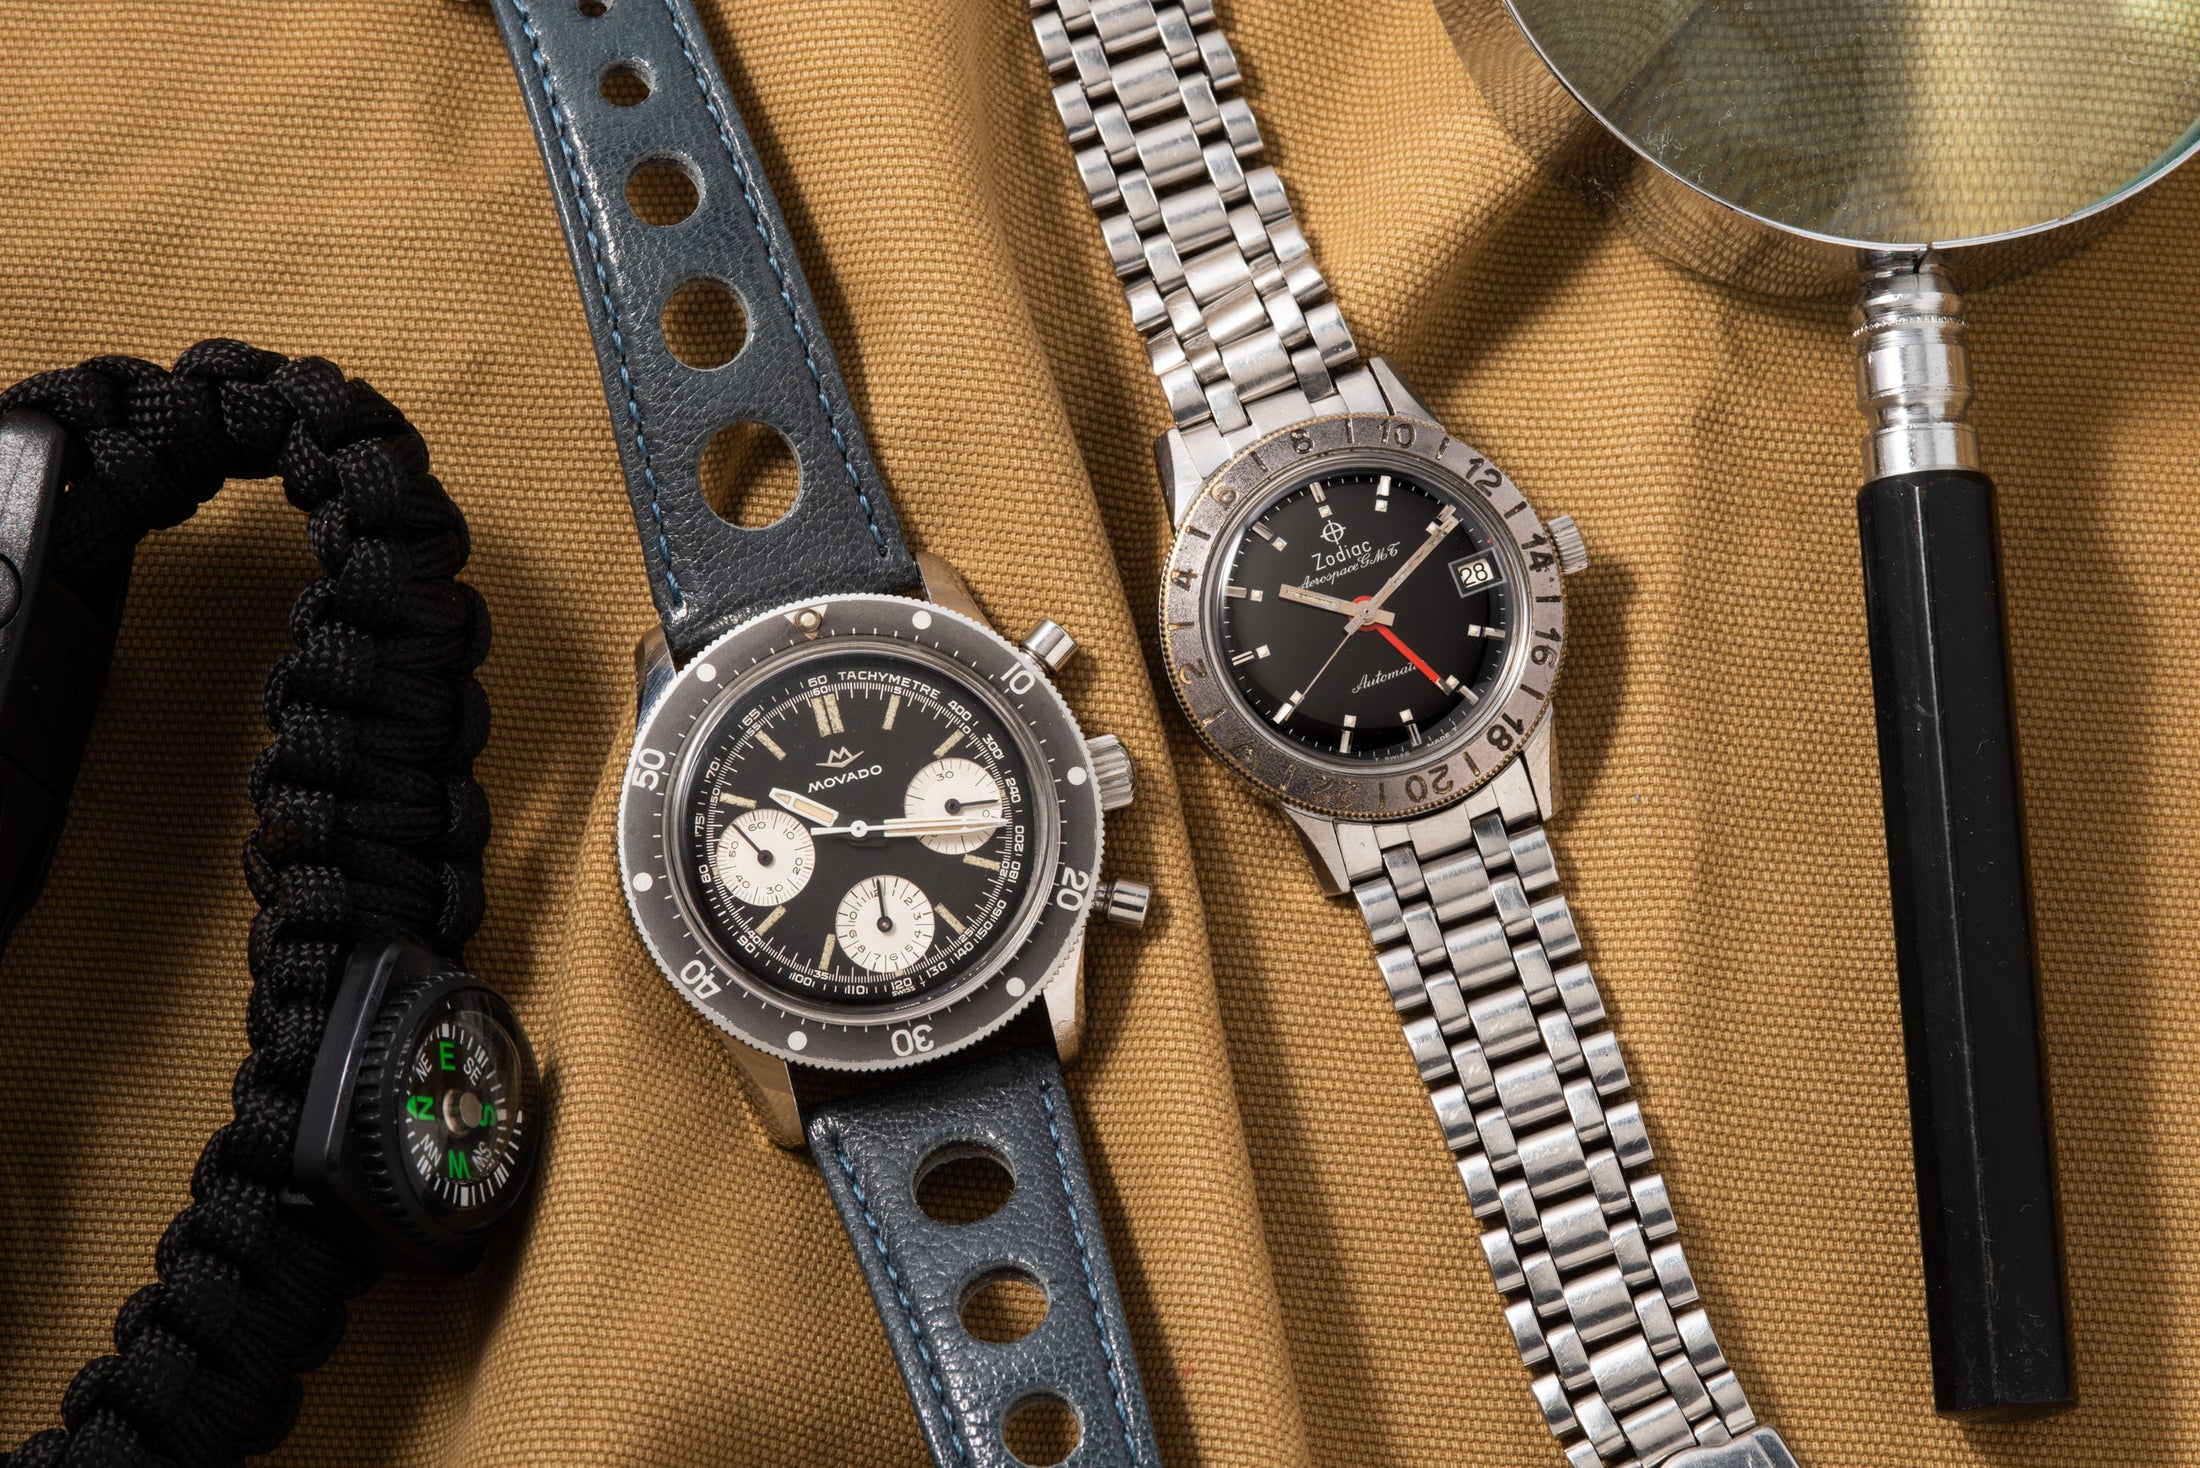 The Chronograph vs. The GMT: What’s More Useful